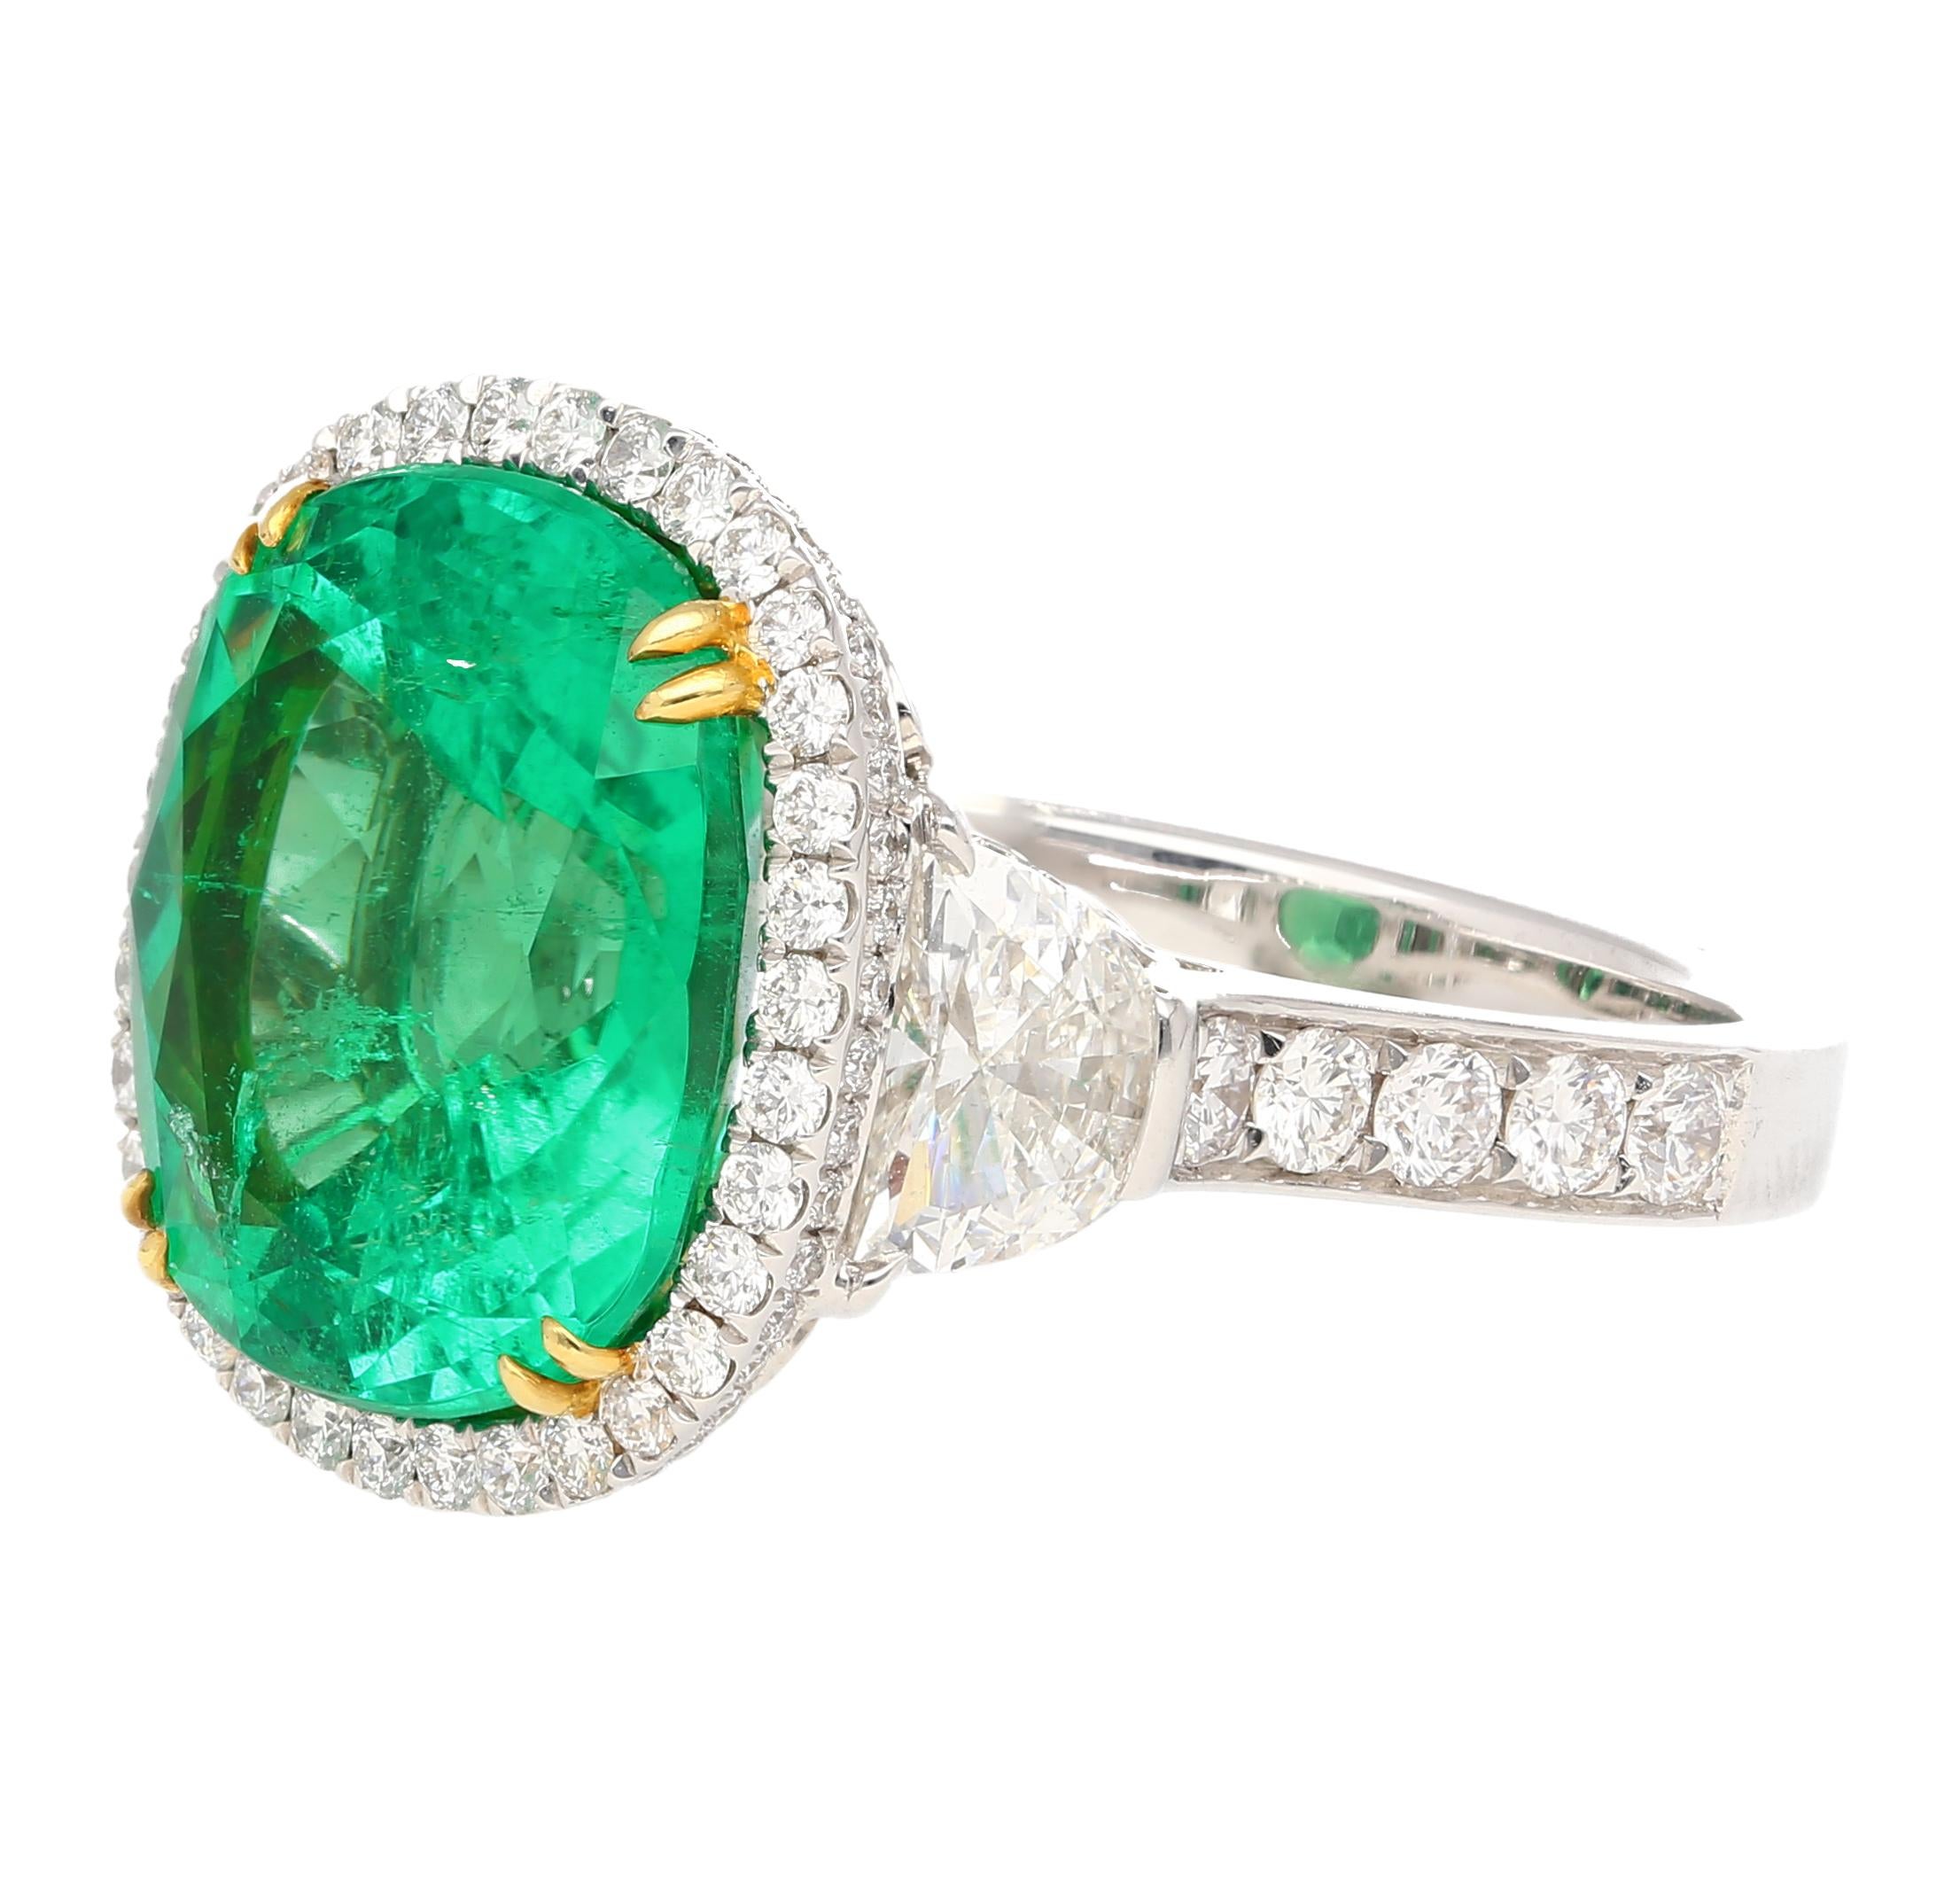 AGL Certified 7.36 carat no oil Colombian Emerald ring. Featuring 2 half moon-cut diamond side stones with 106 round cut diamonds mounted on the shank. All set in an 18 karat solid gold ring setting. 18K white gold shank with yellow gold prongs.